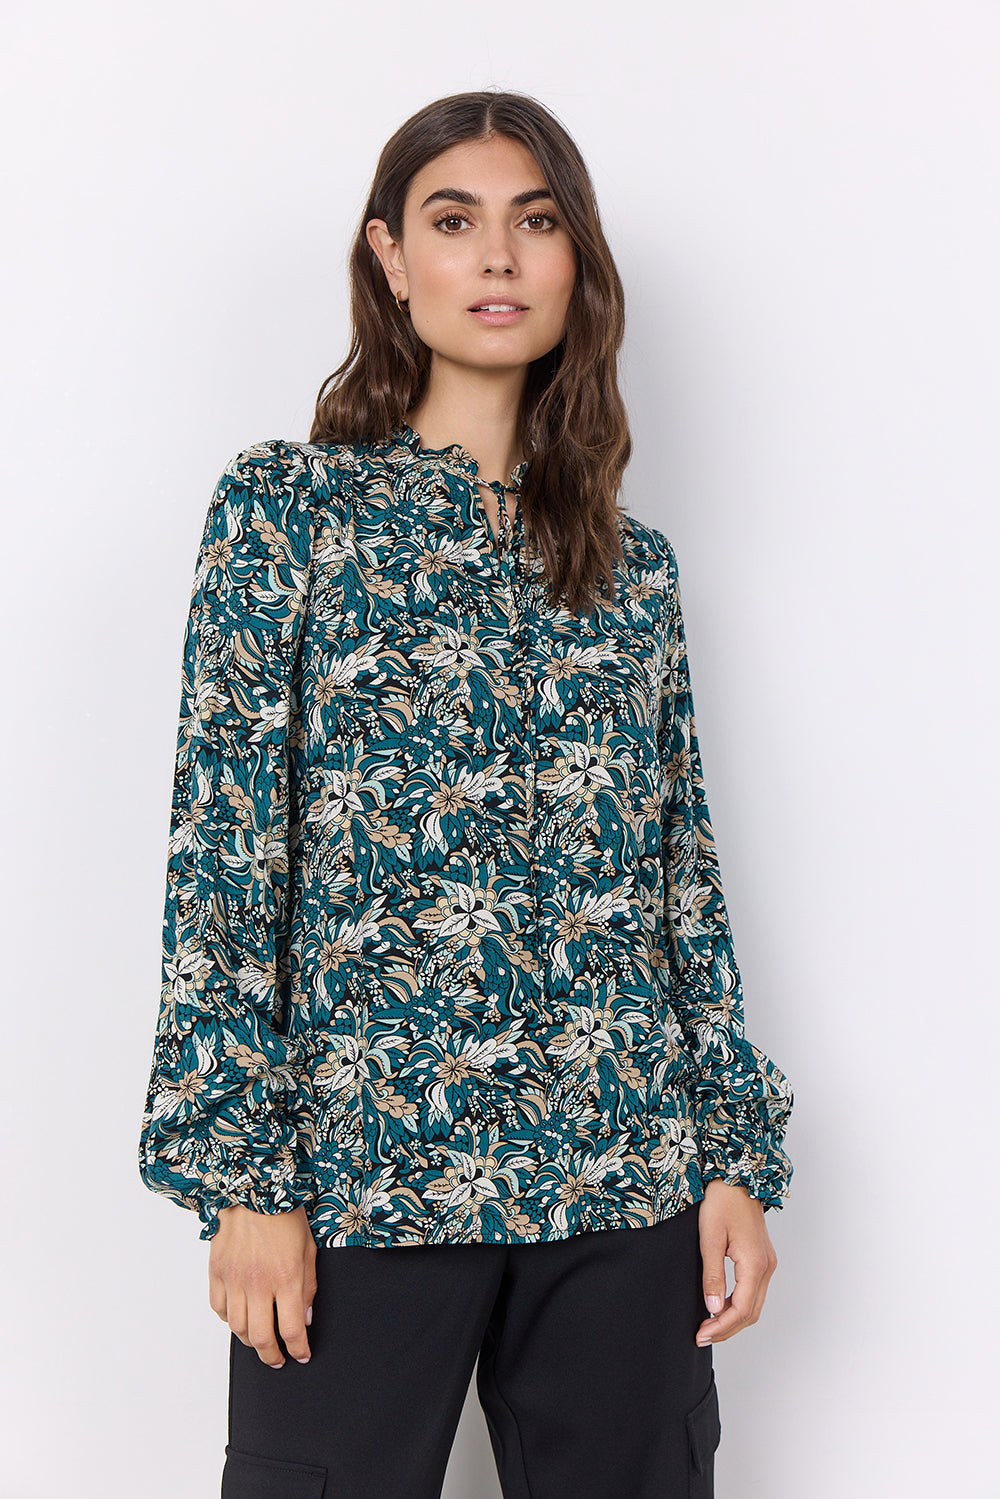 Soya Concept Long Sleeve Top - Style 40.77